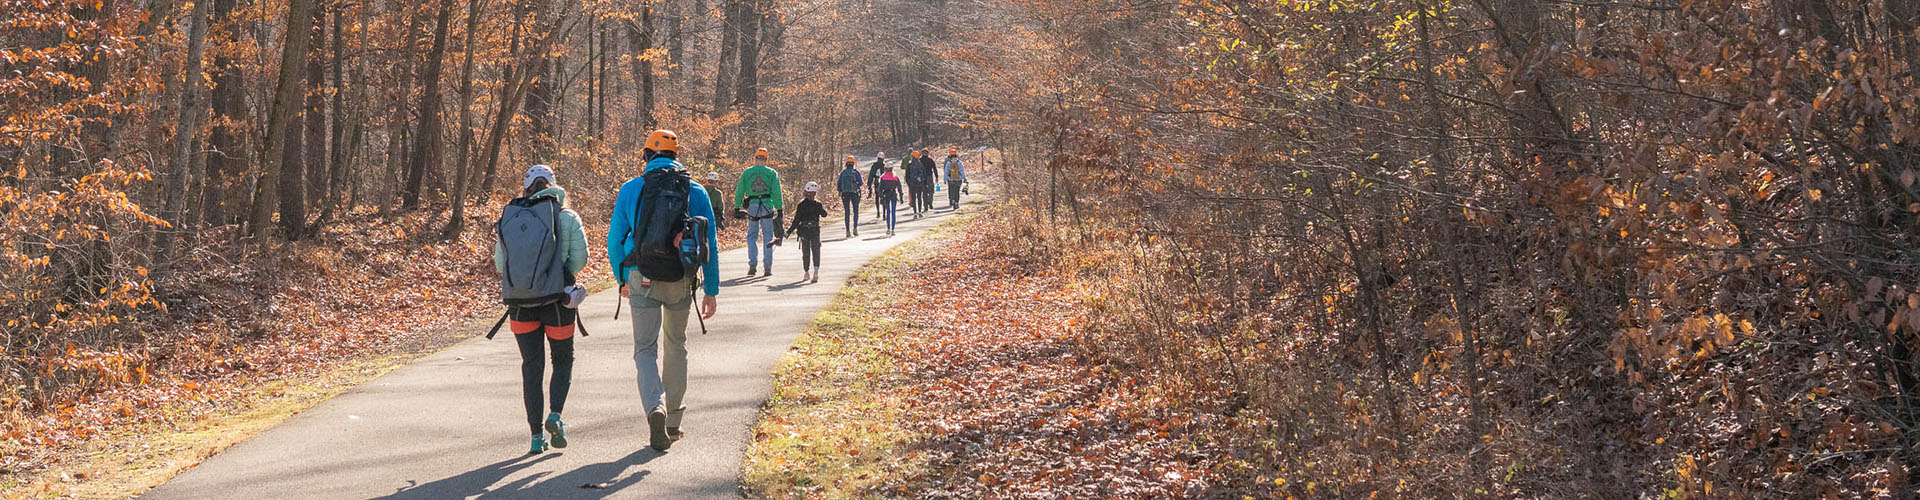 A group of people walking along a path surrounded by trees that have almost lost all their fall leaves